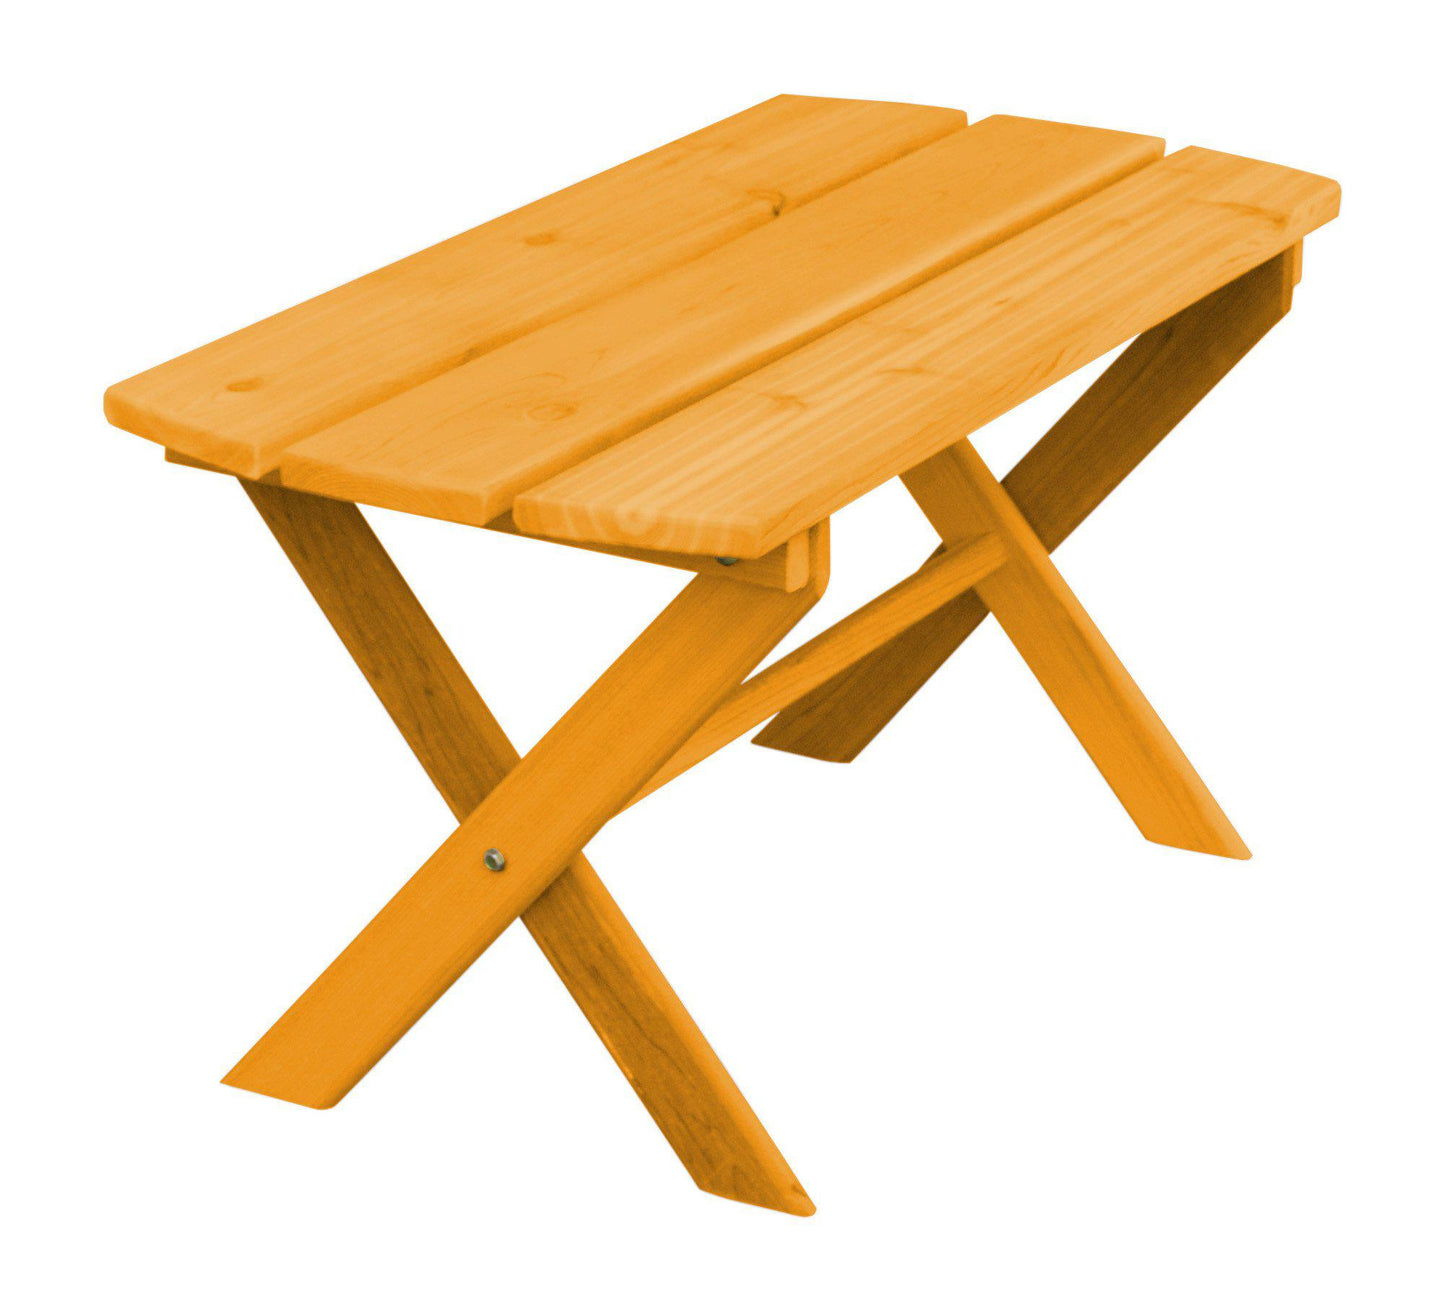 Regallion Outdoor Western Red Cedar Folding Coffee Table - LEAD TIME TO SHIP 2 WEEKS